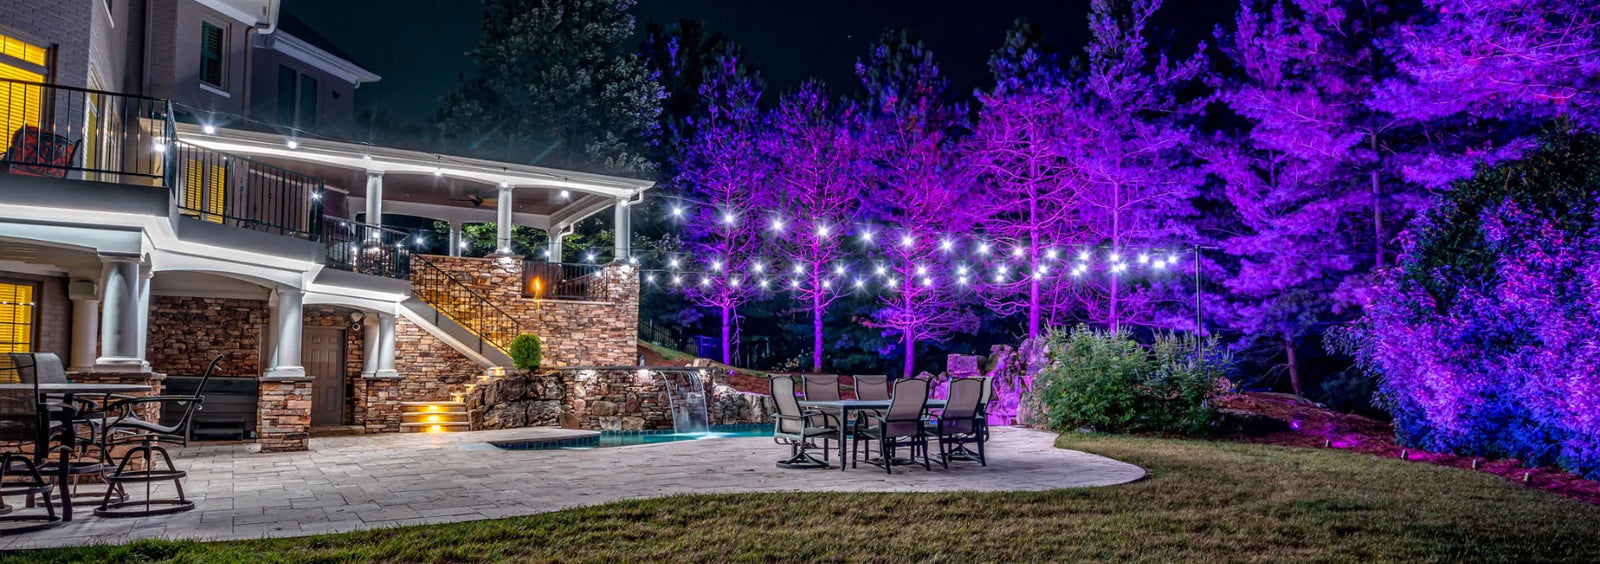 string lights in a upscale backyard